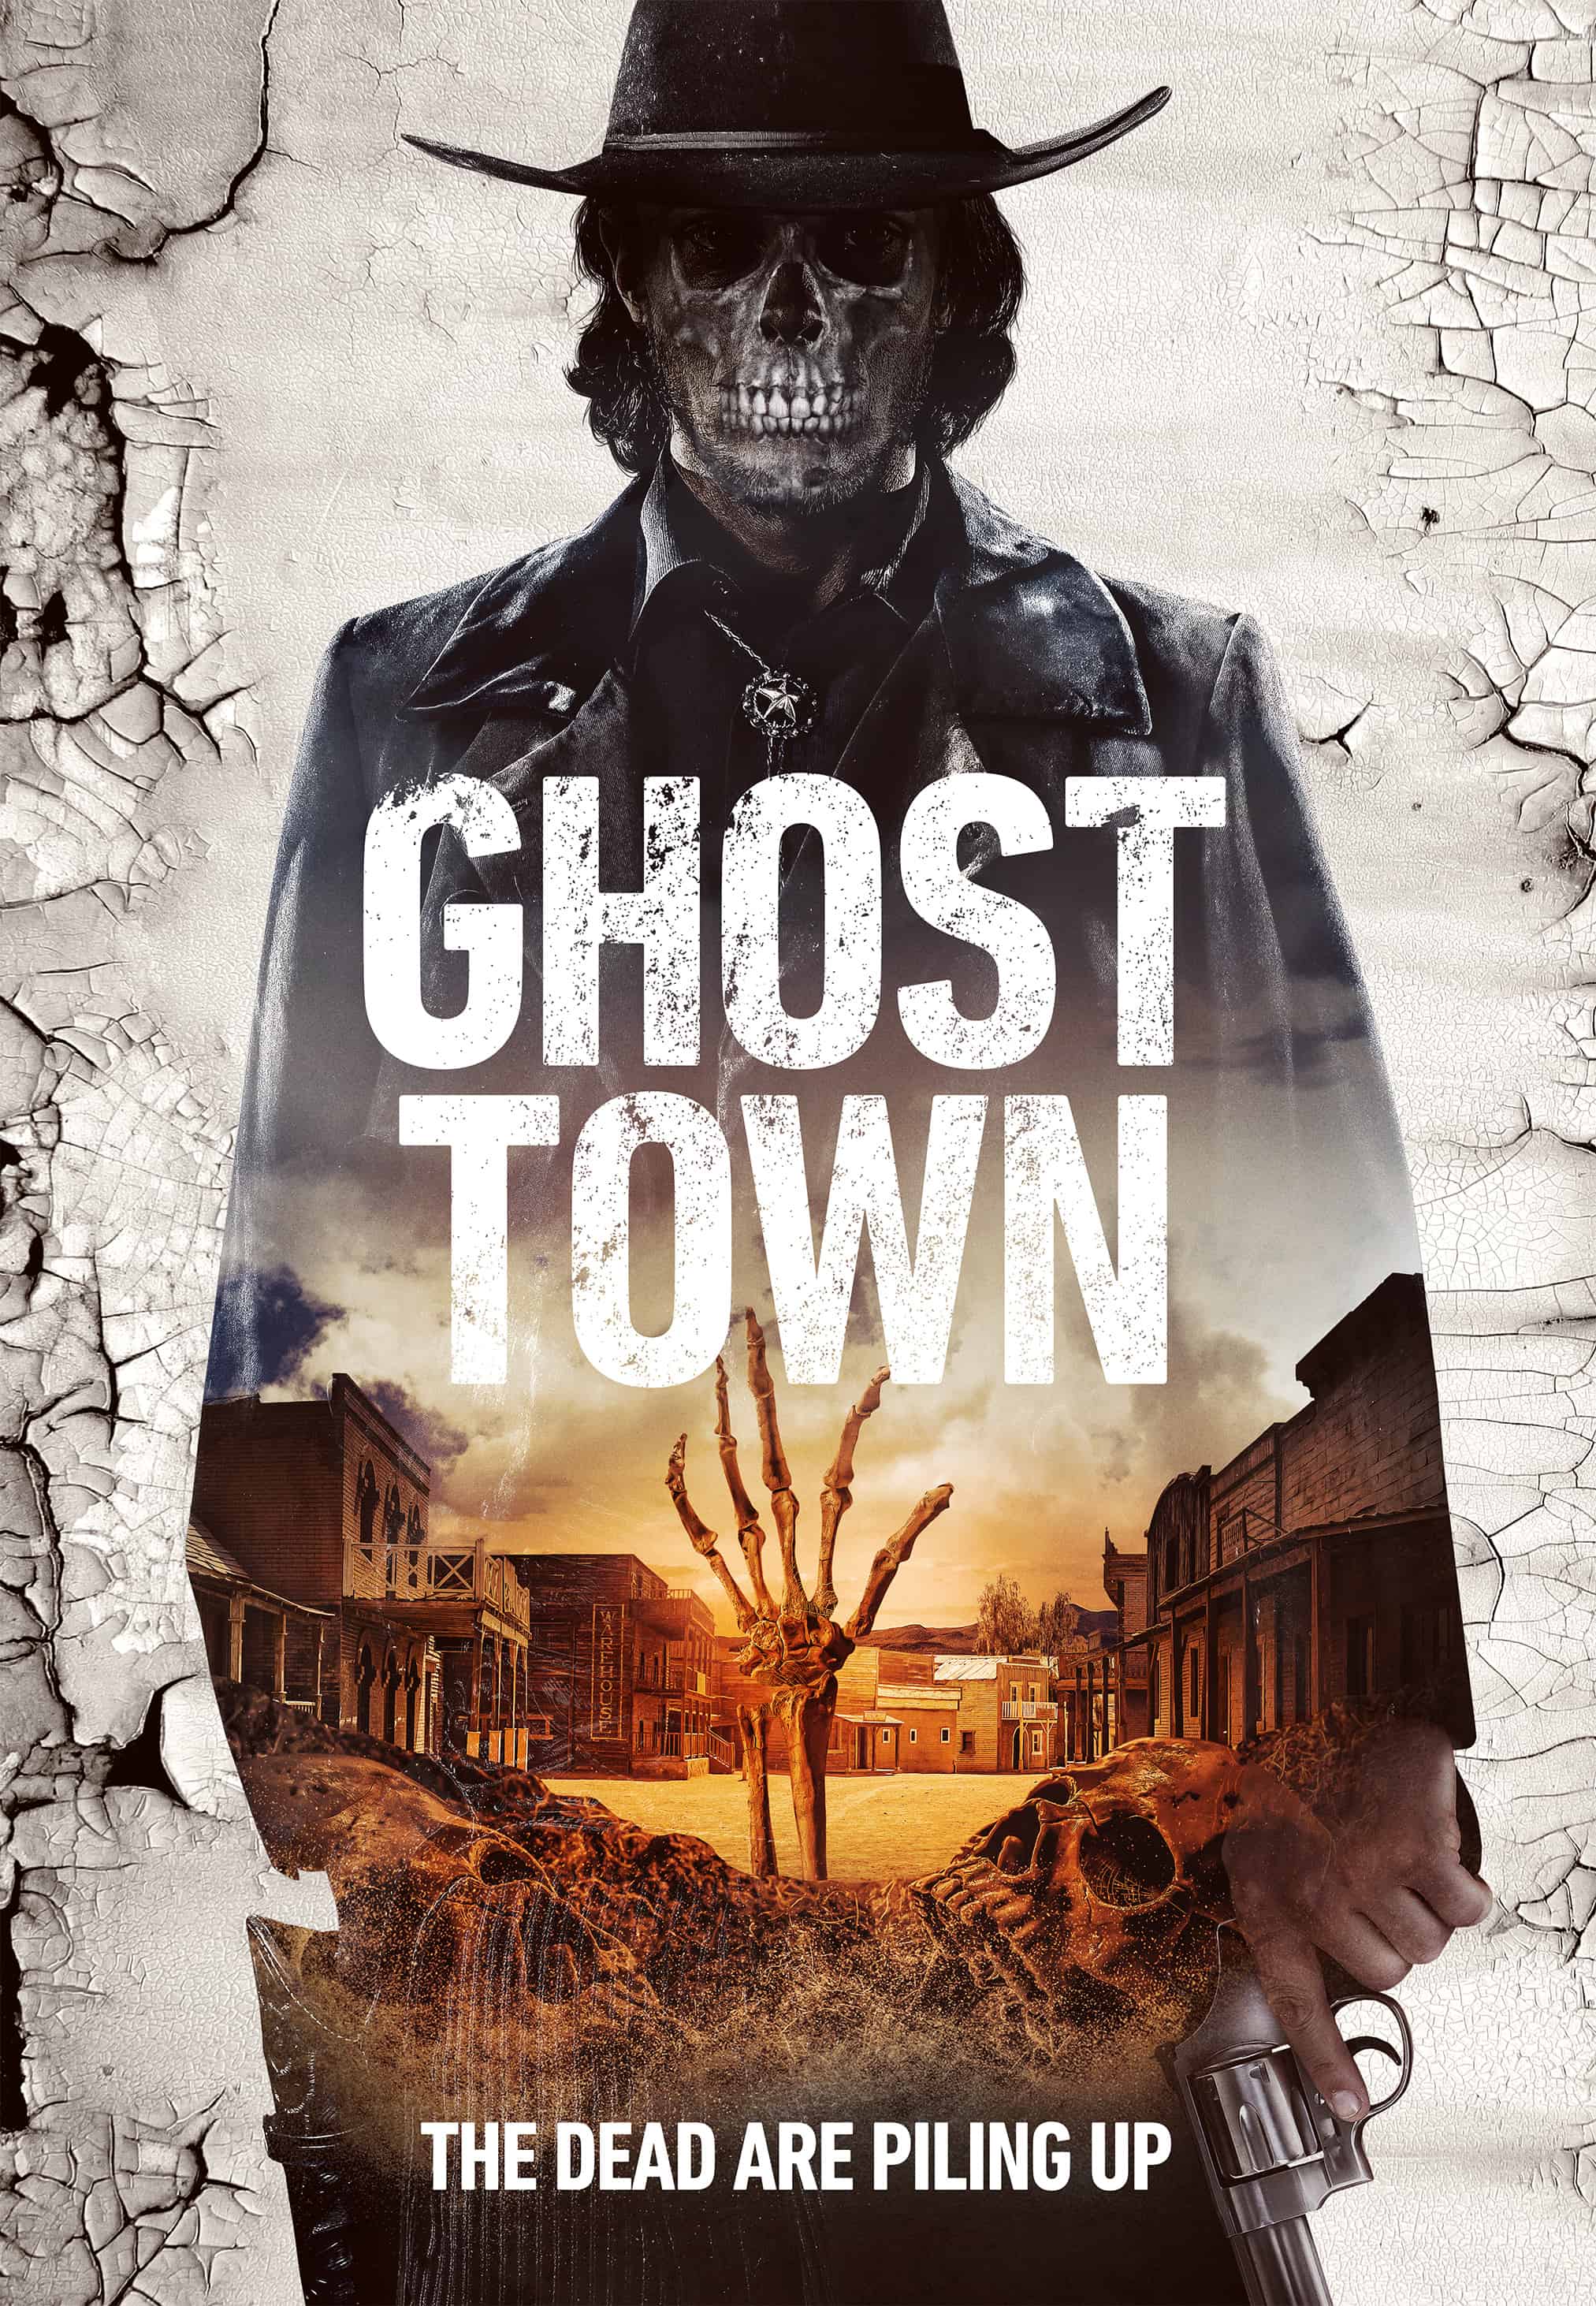 Ghost Town offers up a poster and trailer arrives March 7th 17